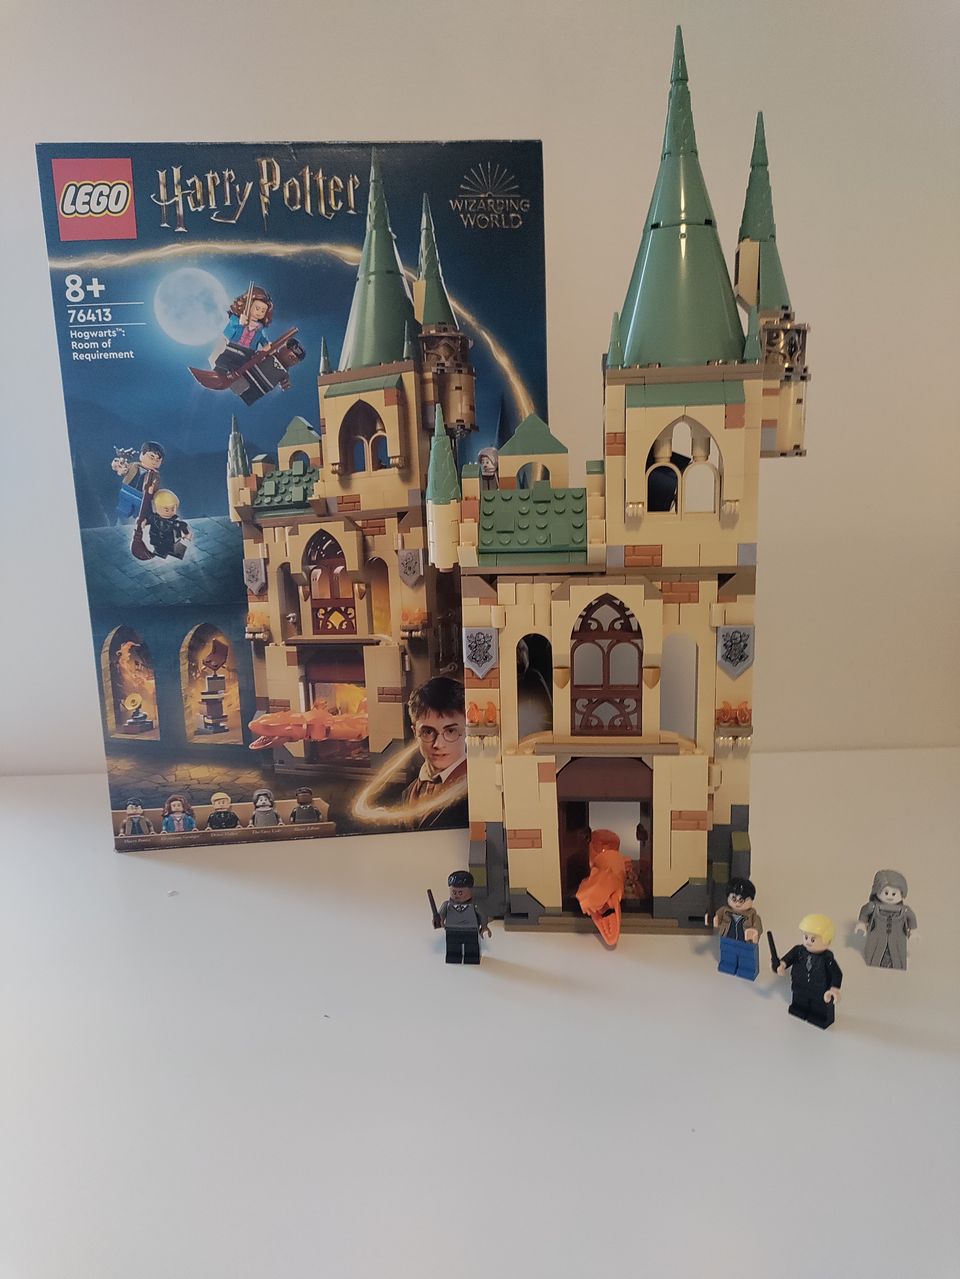 Lego Harry Potter Hogwarts room of requirement